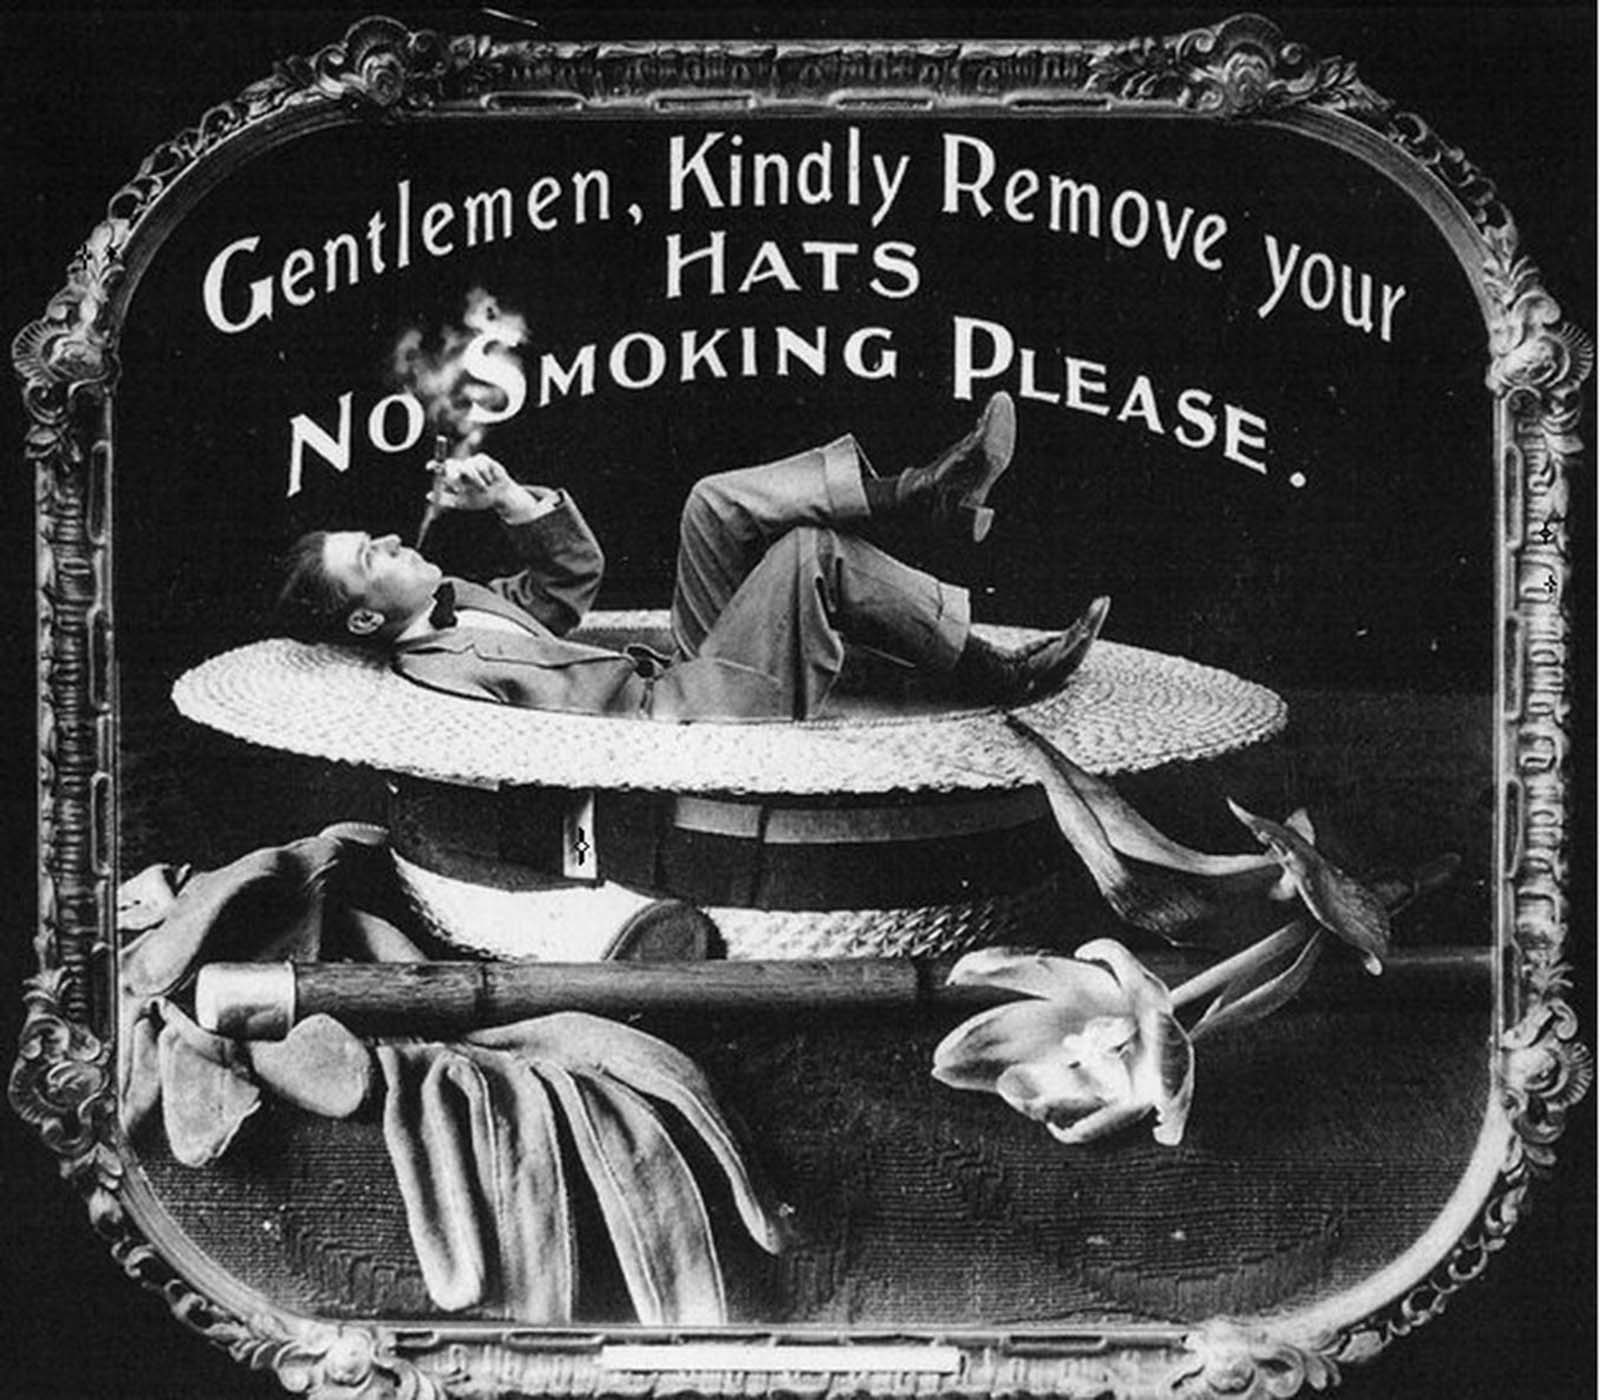 In 1912 those who attended a film screening were told to keep their cigarettes in their pockets.